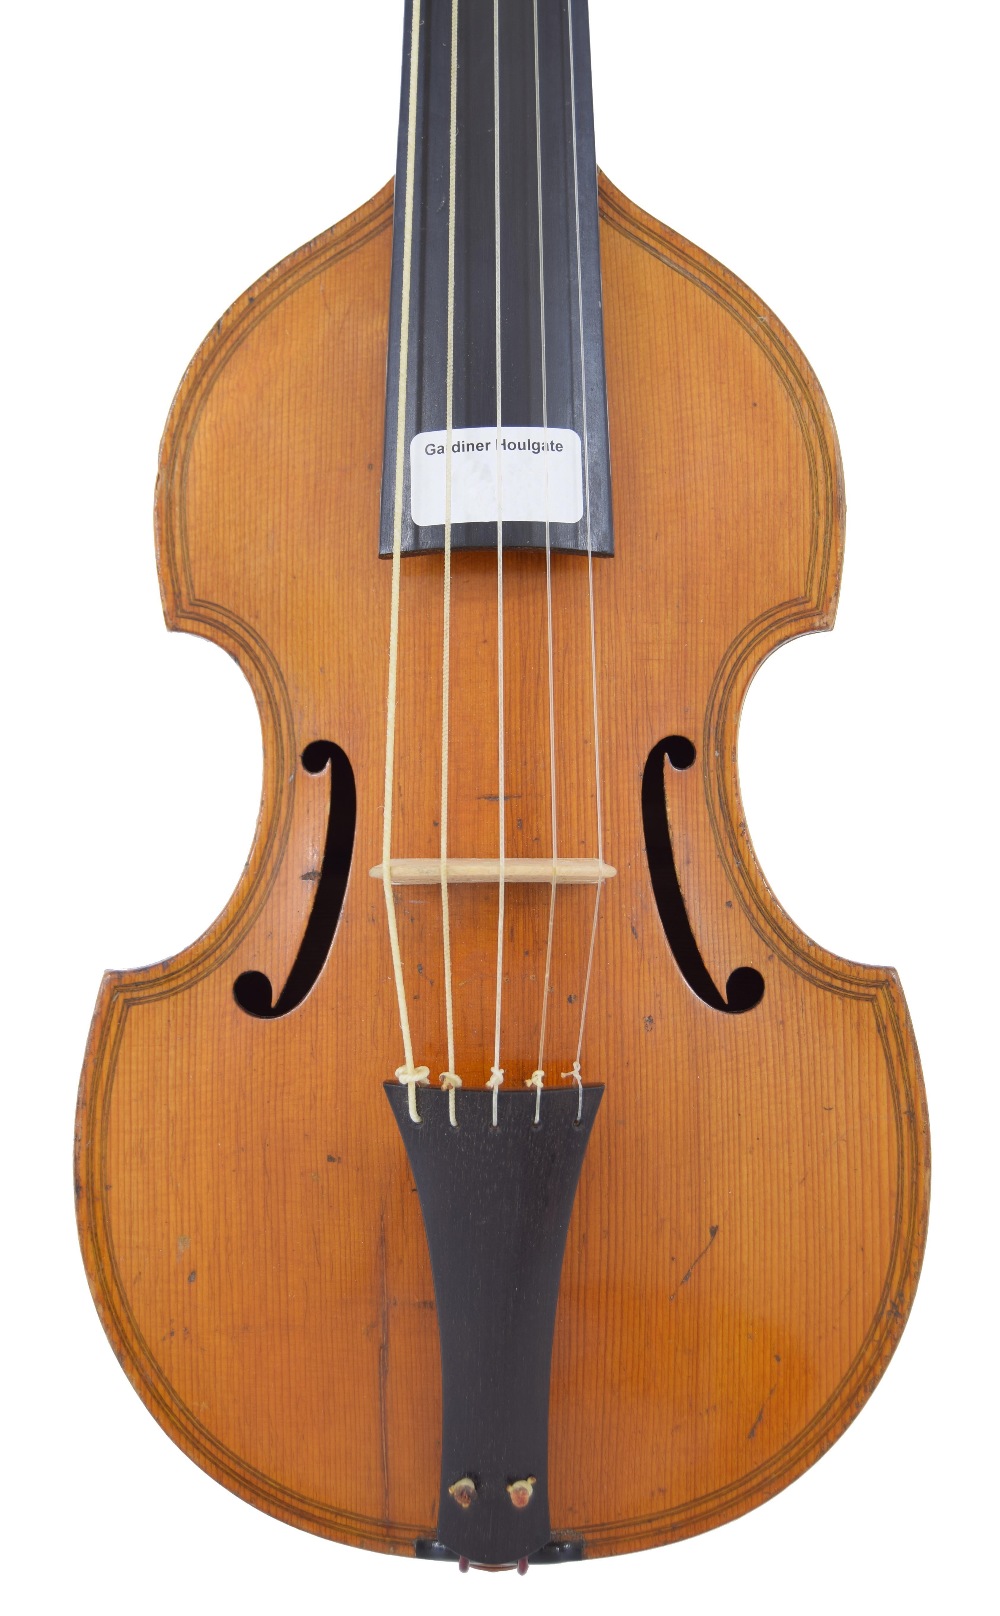 Fine and rare French Pardessus de viole (or Quinton), unlabelled, but made by Louis Guersan in Paris